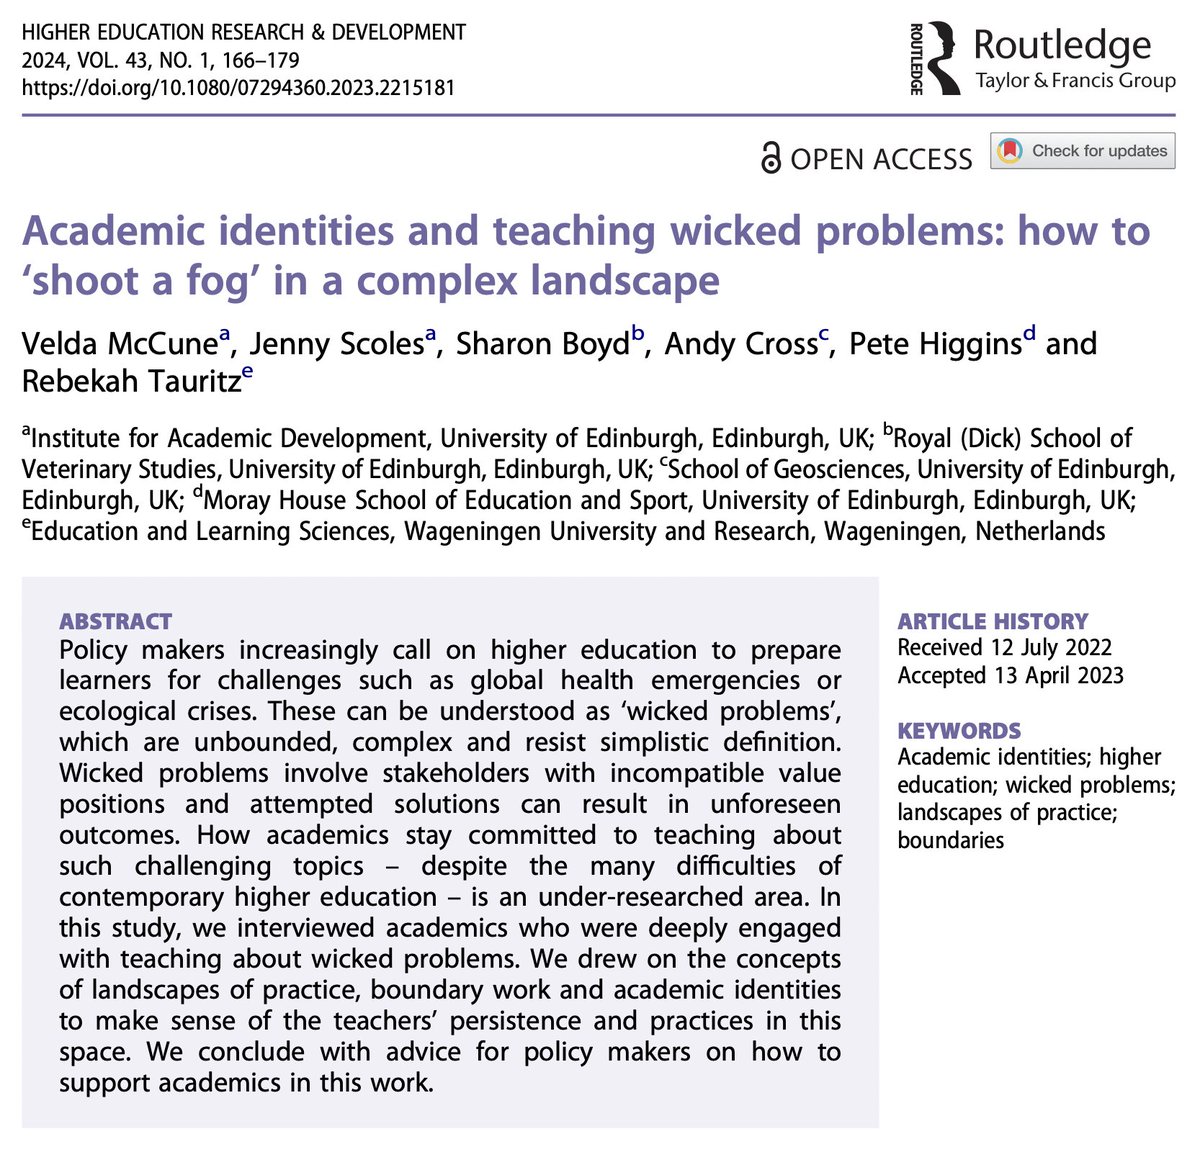 Academic identities and teaching wicked problems: how to ‘shoot a fog’ in a complex landscape

@VelMc, @The_OfficeDog, @SBoydie, @RLTauritz et al

🔓→ doi.org/10.1080/072943…

#HigherEd #AcademicIdentities #WickedProblems #UniversityTeaching #LandscapesOfPractice #BoundaryWork